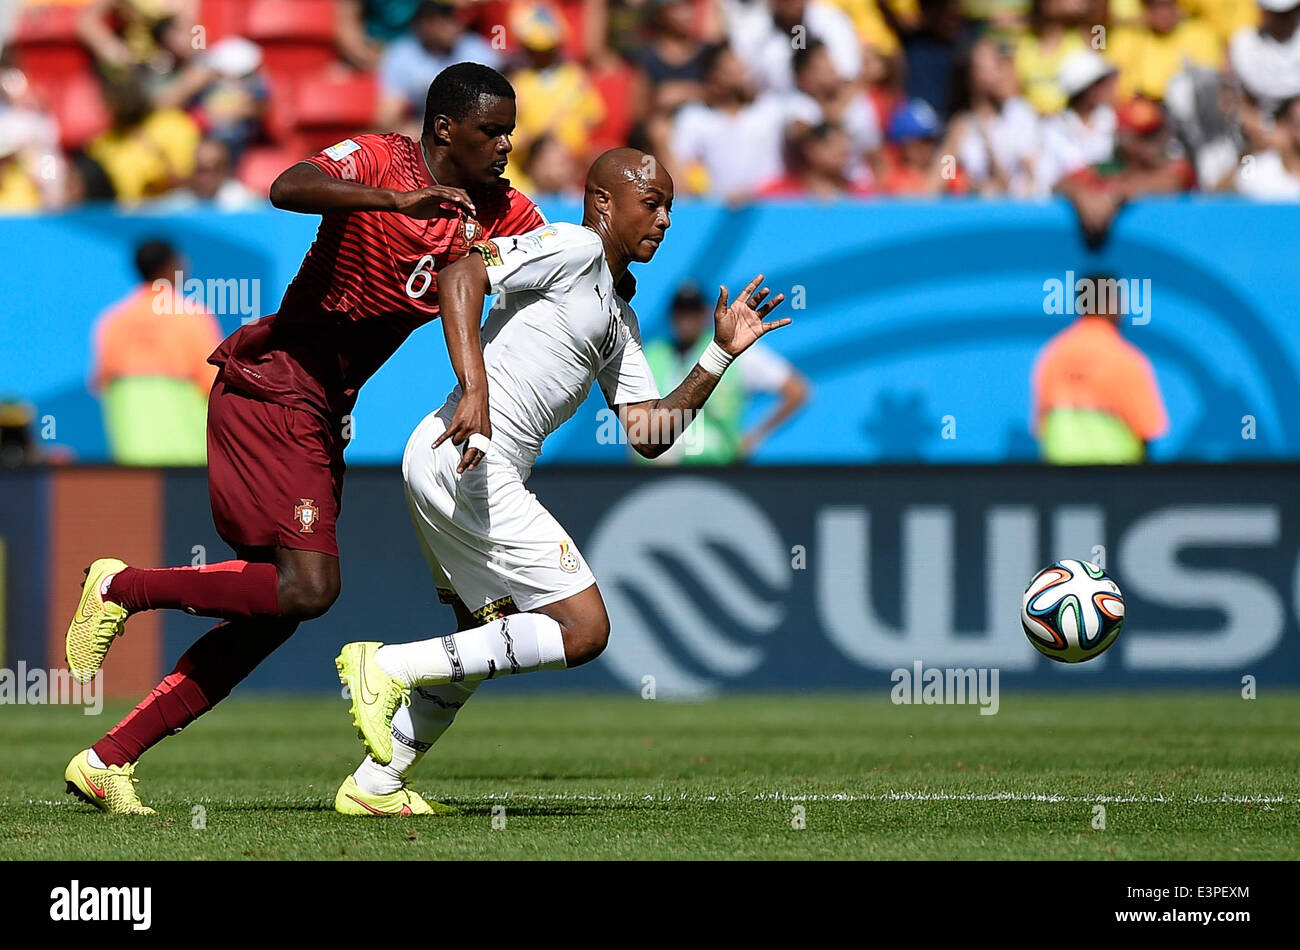 Brasilia, Brazil. 26th June, 2014. Portugal's William Carvalho (L) competes with Gana's Andre Ayew during a Group G match between Portugal and Ghana of 2014 FIFA World Cup at the Estadio Nacional Stadium in Brasilia, Brazil, June 26, 2014. Portugal won 2-1 over Ghana on Thursday. © Qi Heng/Xinhua/Alamy Live News Stock Photo